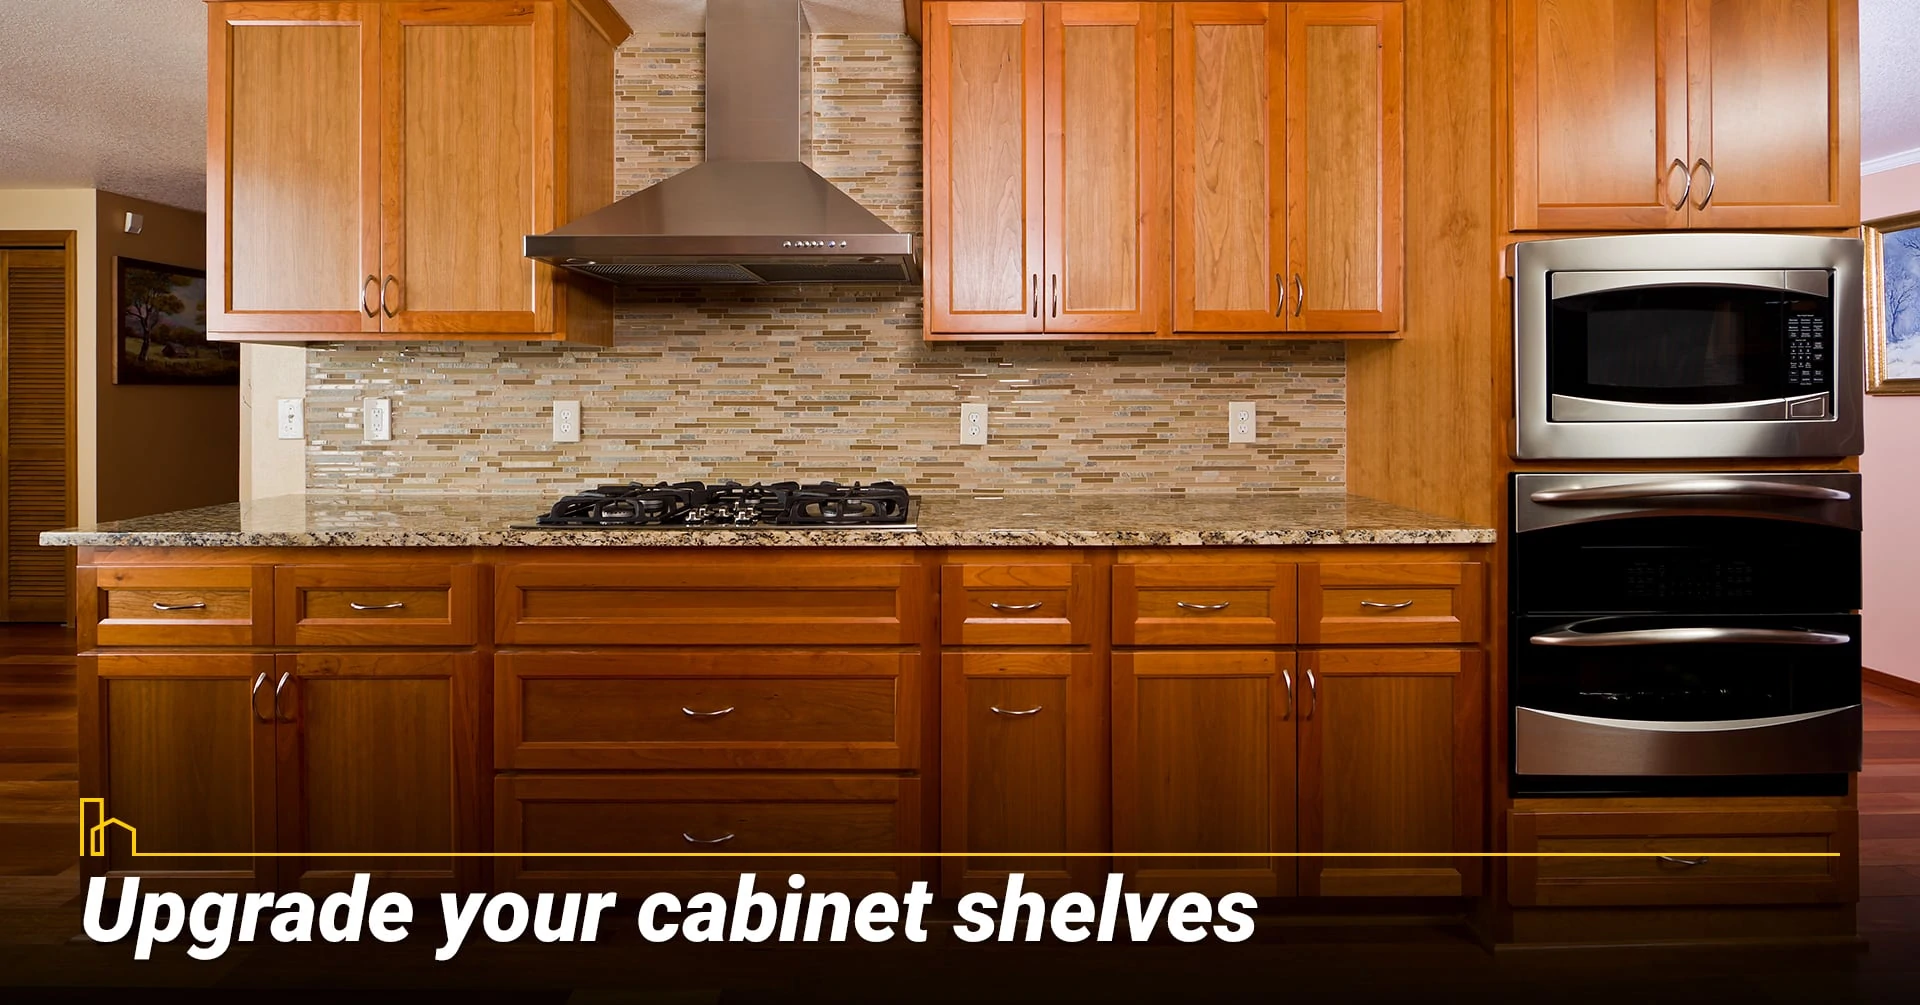 Upgrade your cabinet shelves, upgrade your kitchen